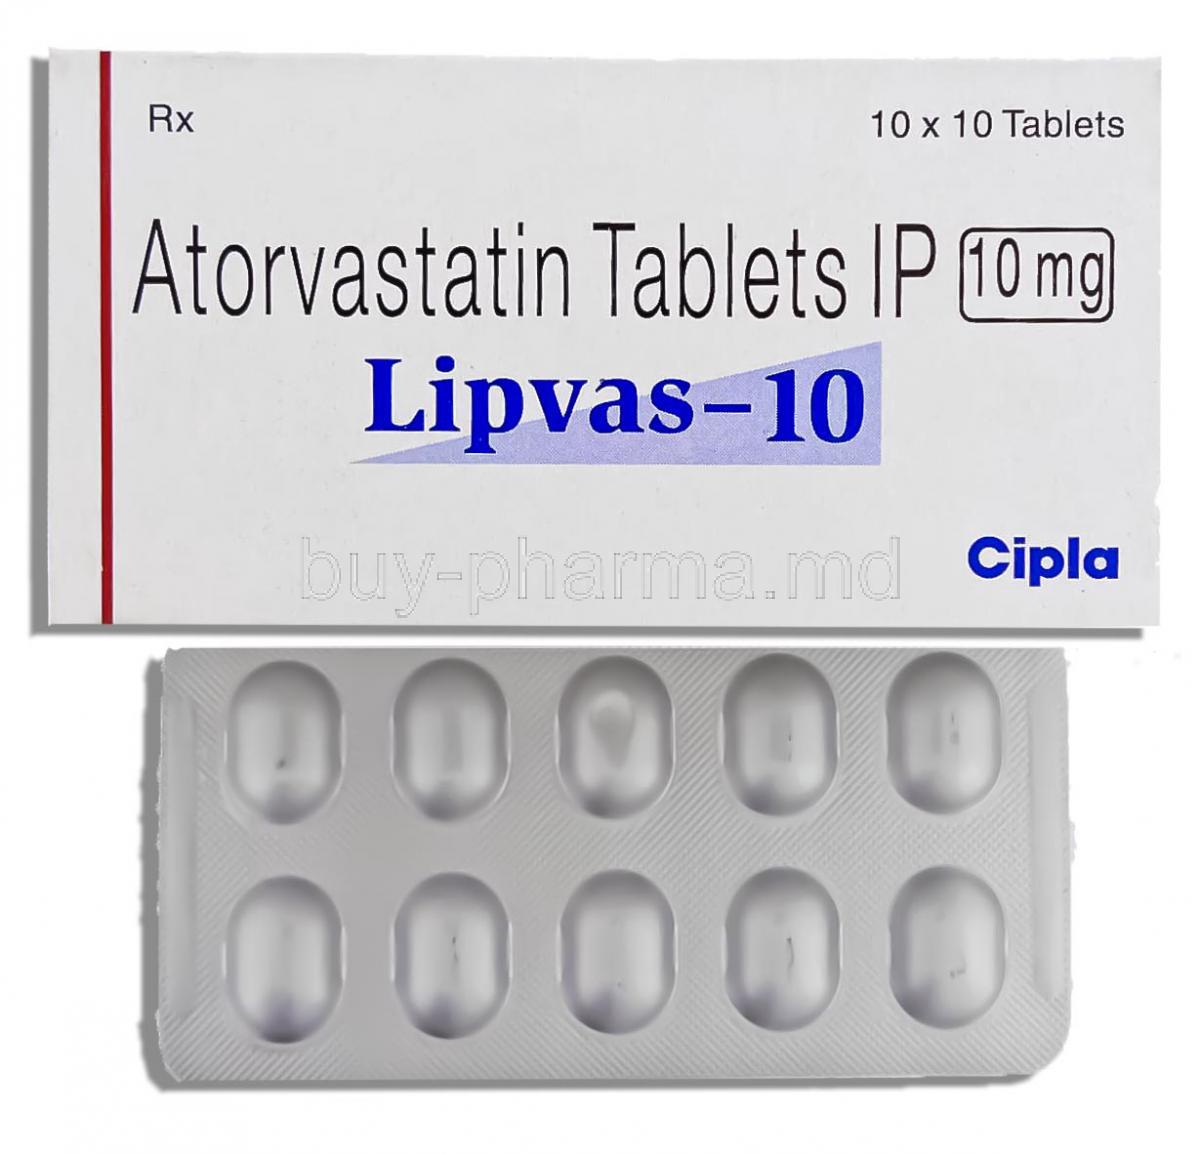 what is the generic name of atorvastatin